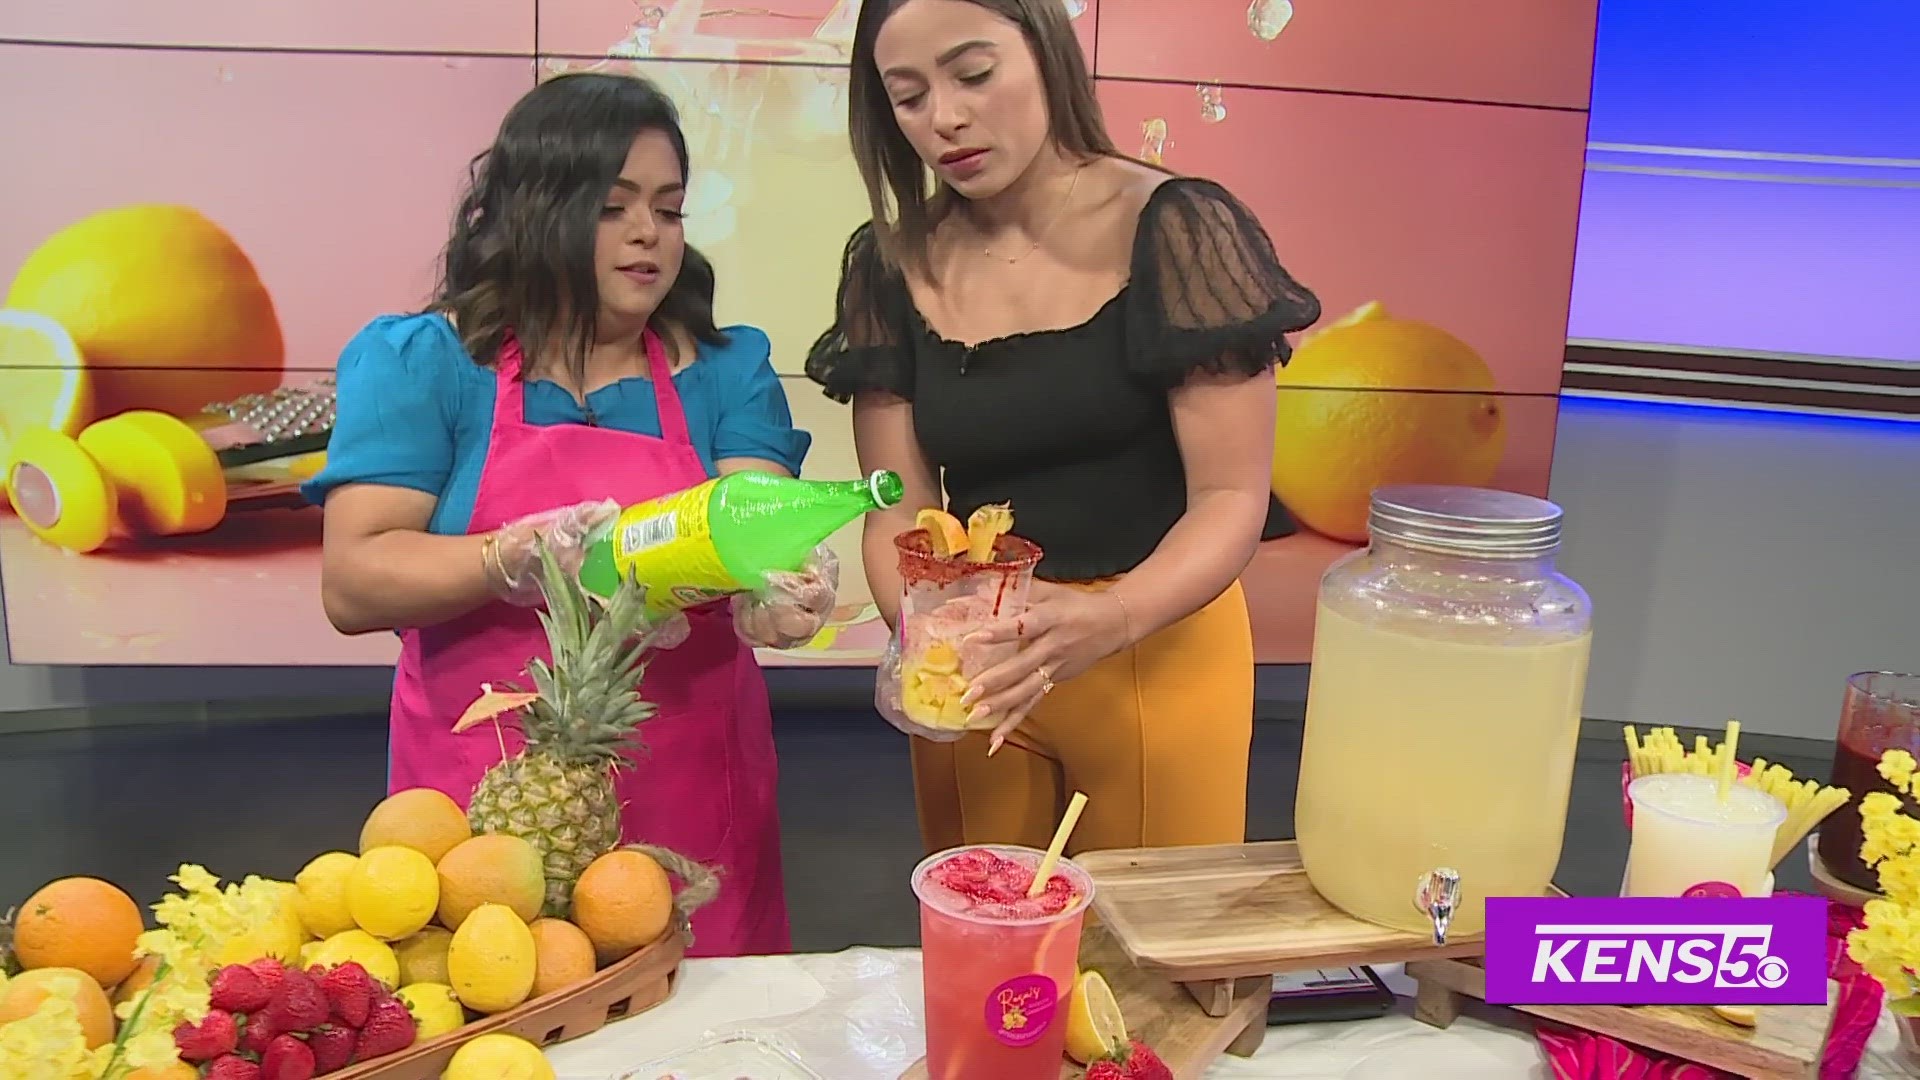 Olma Amaro with Rosa's Rusas & Limonadas shares her deliciously refreshing homemade fruit drinks and lemonades.